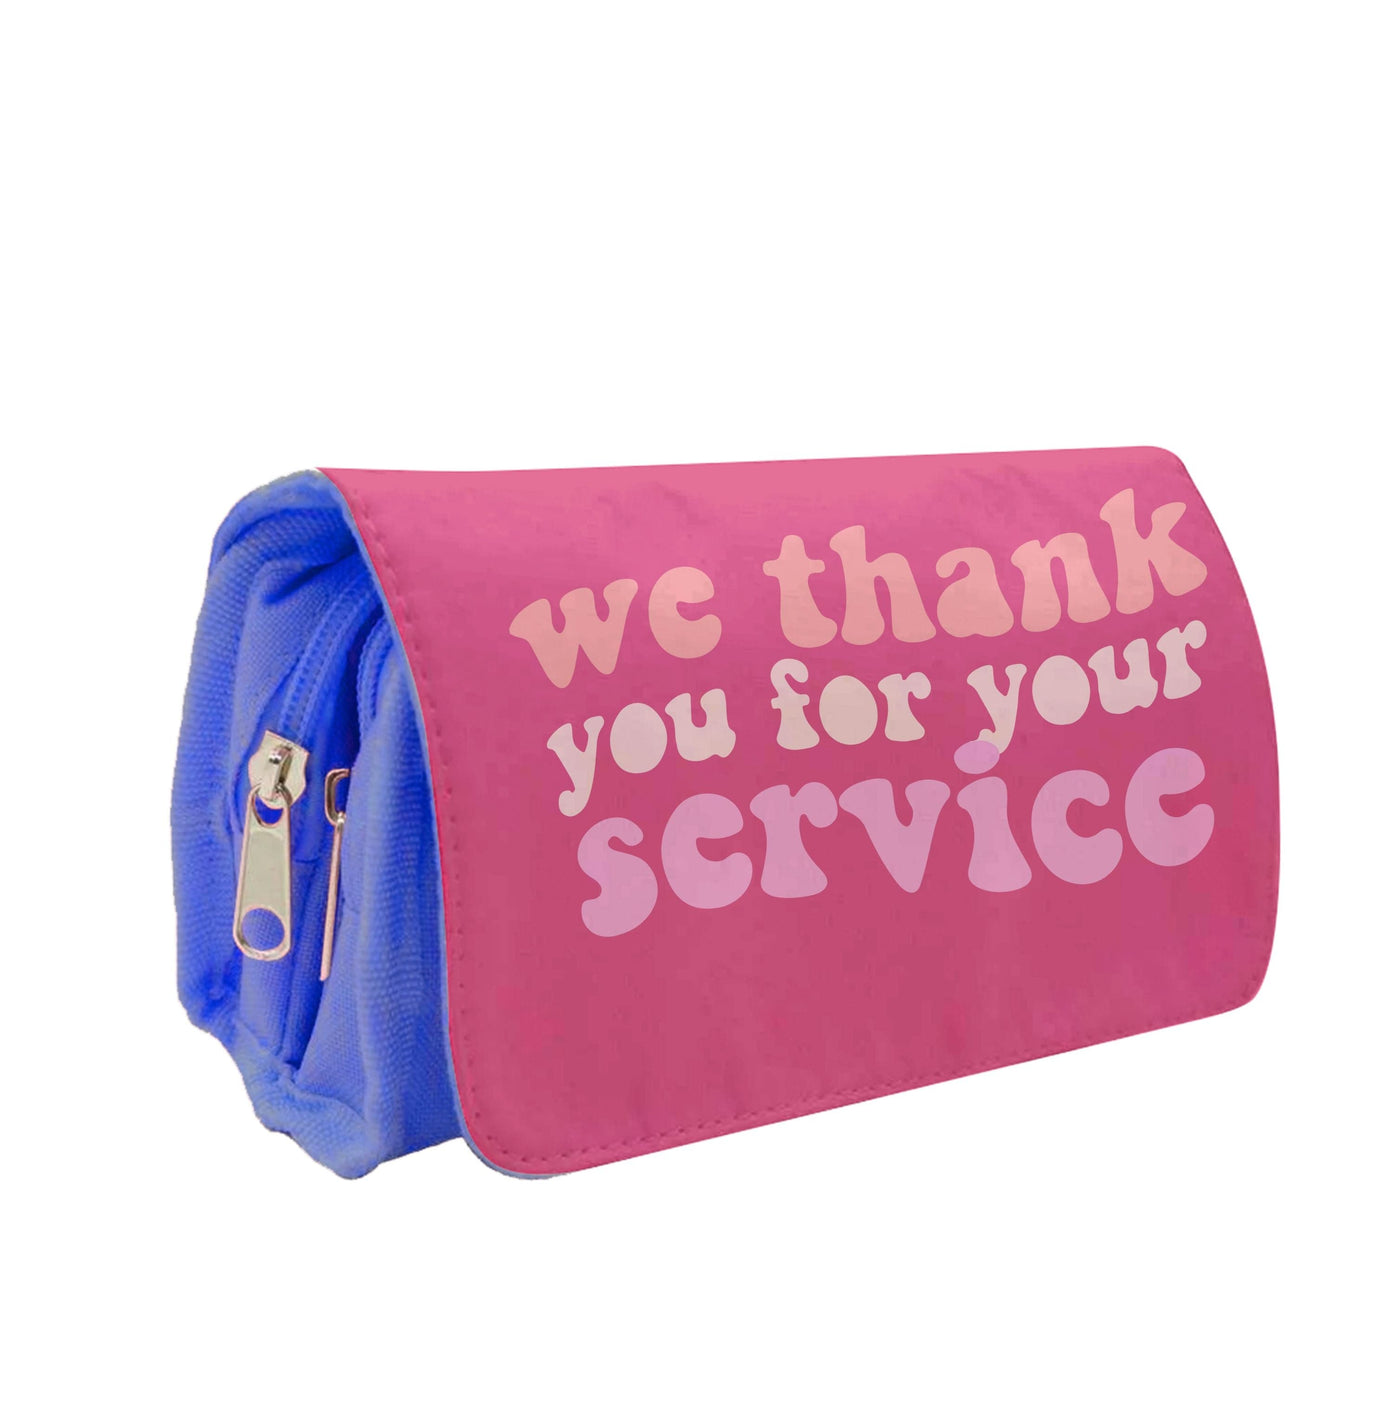 We Thank You For Your Service - Heartstopper Pencil Case